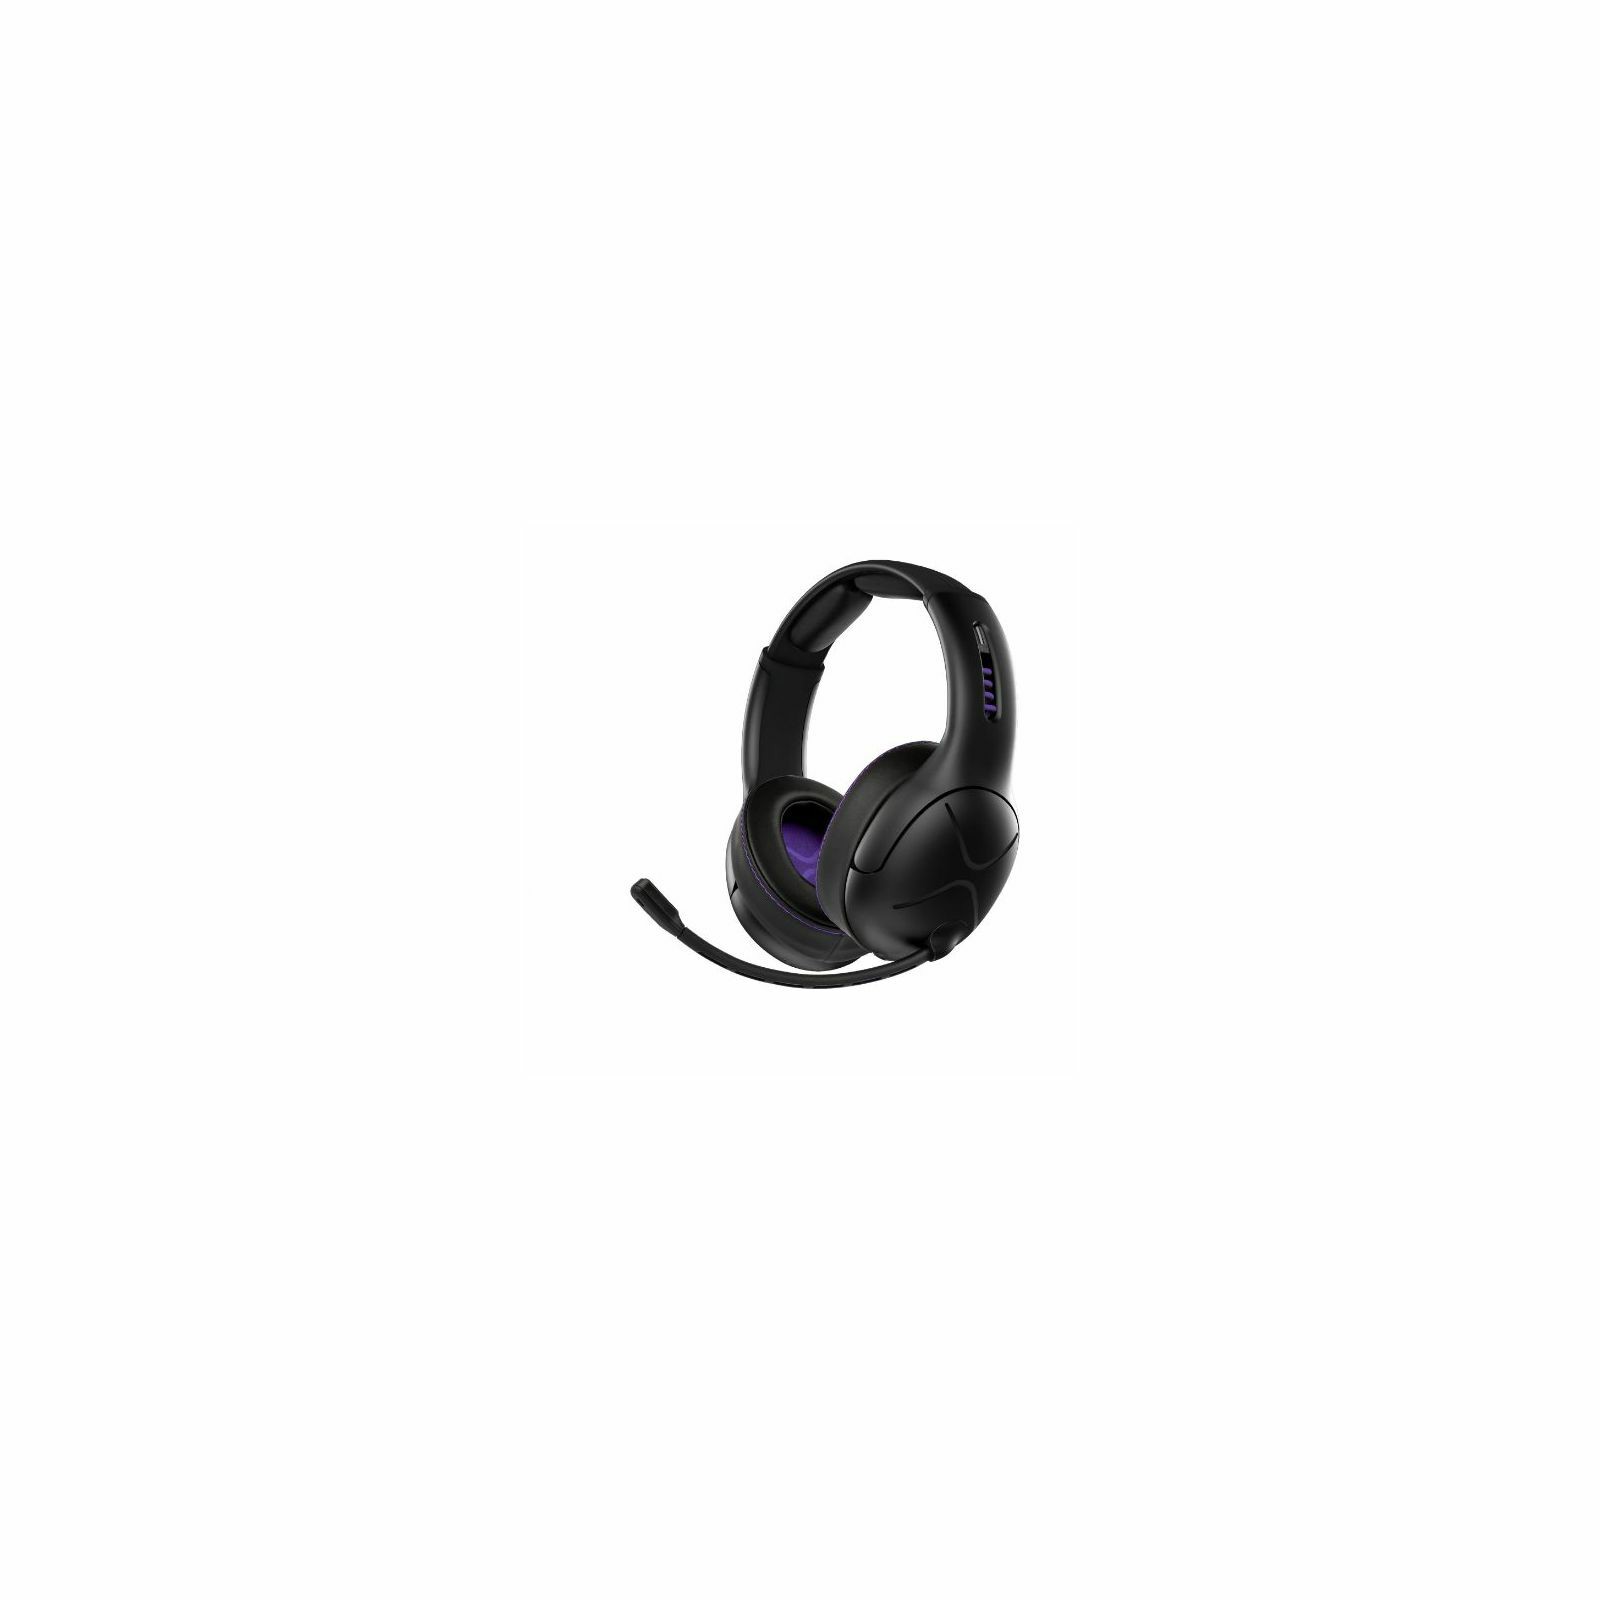 pdp-victrix-gambit-headset-for-xbox-series-x-708056067533_1.jpg